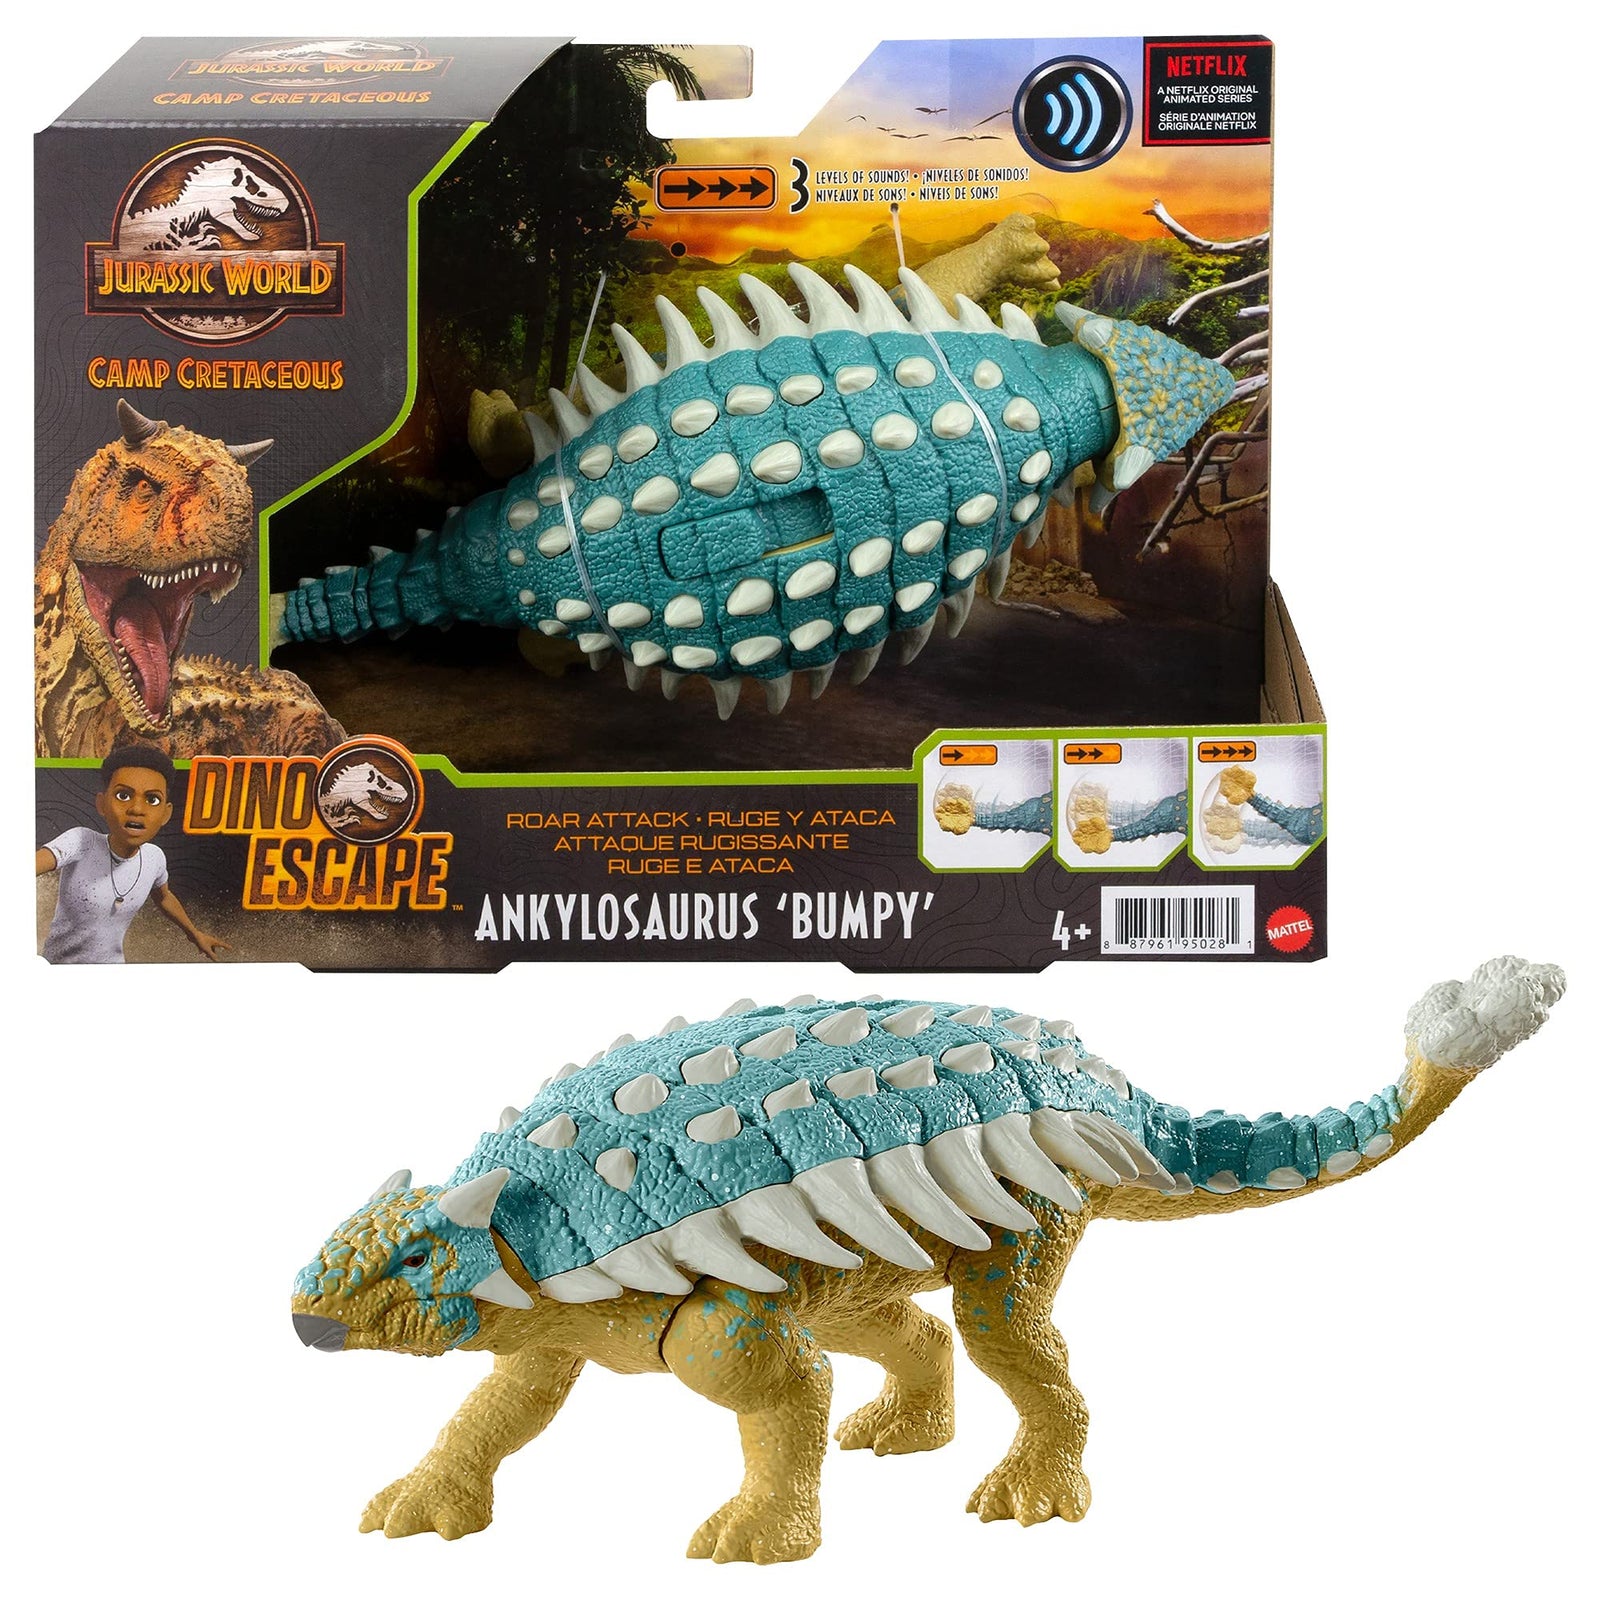 Jurassic World Roar Attack Ankylosaurus Bumpy Camp Cretaceous Dinosaur Figure with Movable Joints, Realistic Sculpting, Strike Feature & Sounds, Herbivore, Kids Gift 4 Years & Up